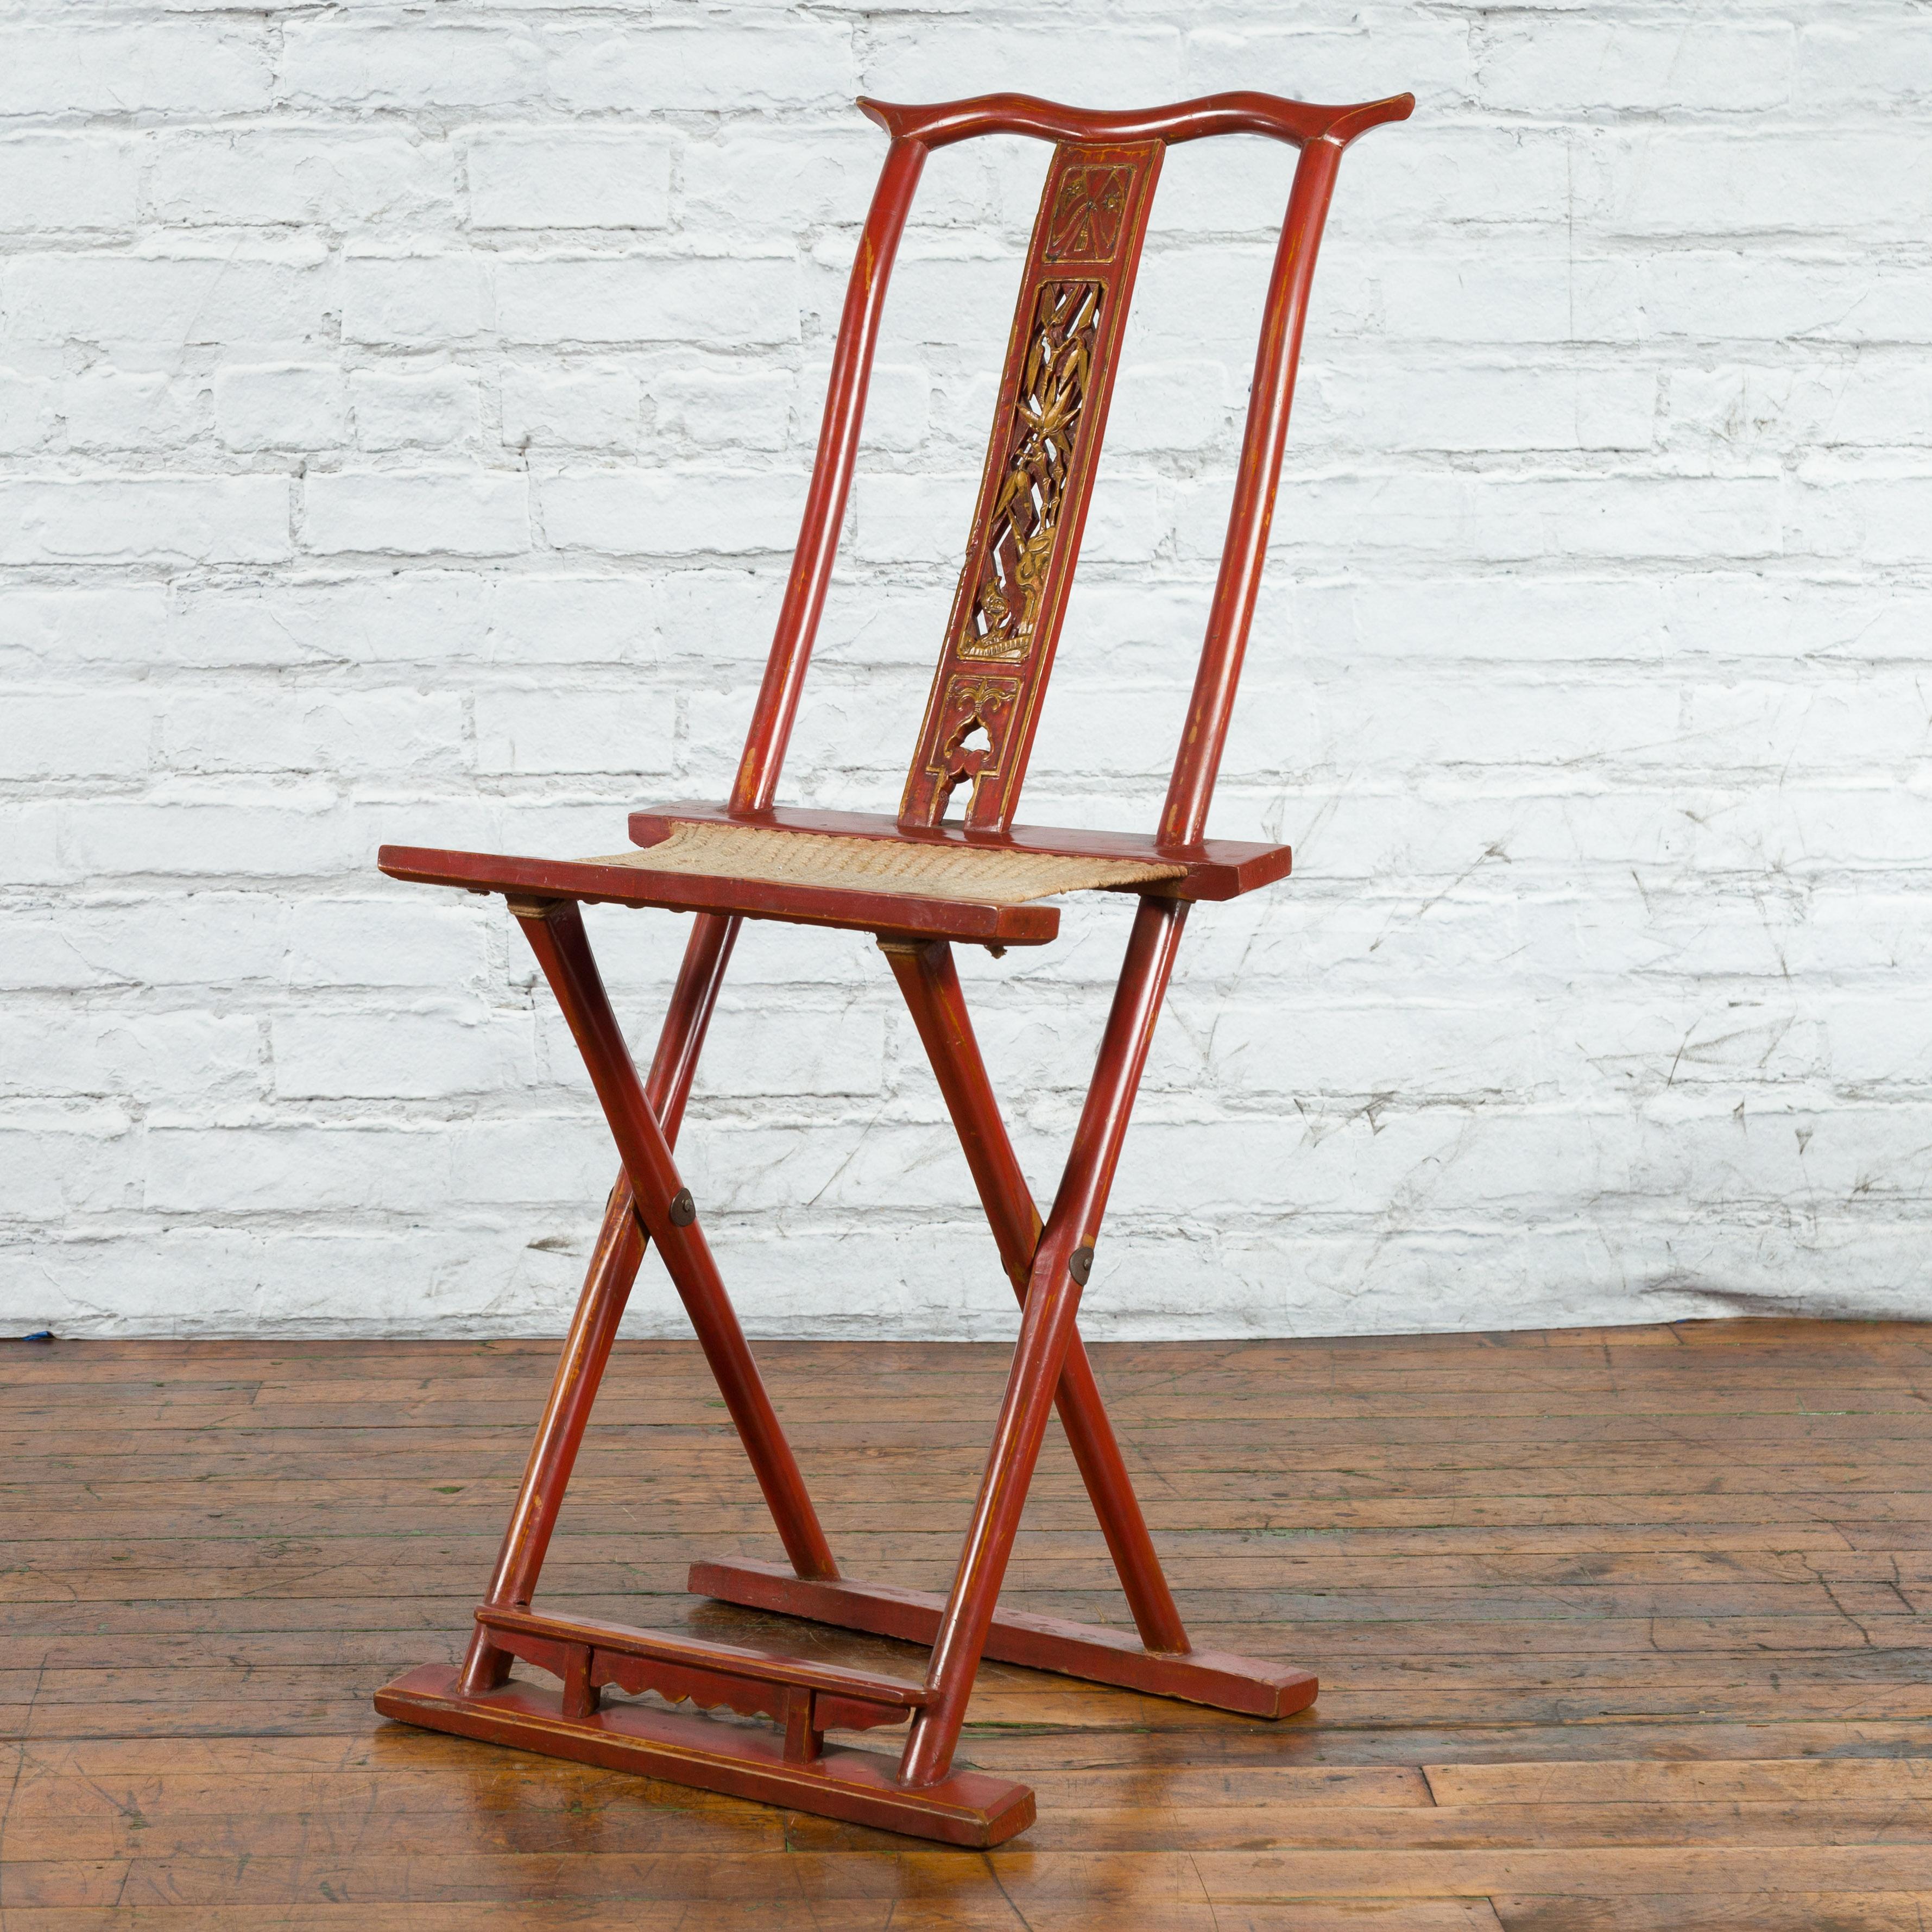 An antique Chinese red lacquered folding traveller’s chair from the early 20th century, with carved motifs, footrest and woven fabric. Created in China during the early years of the 20th century, this folding chair features a red lacquered body